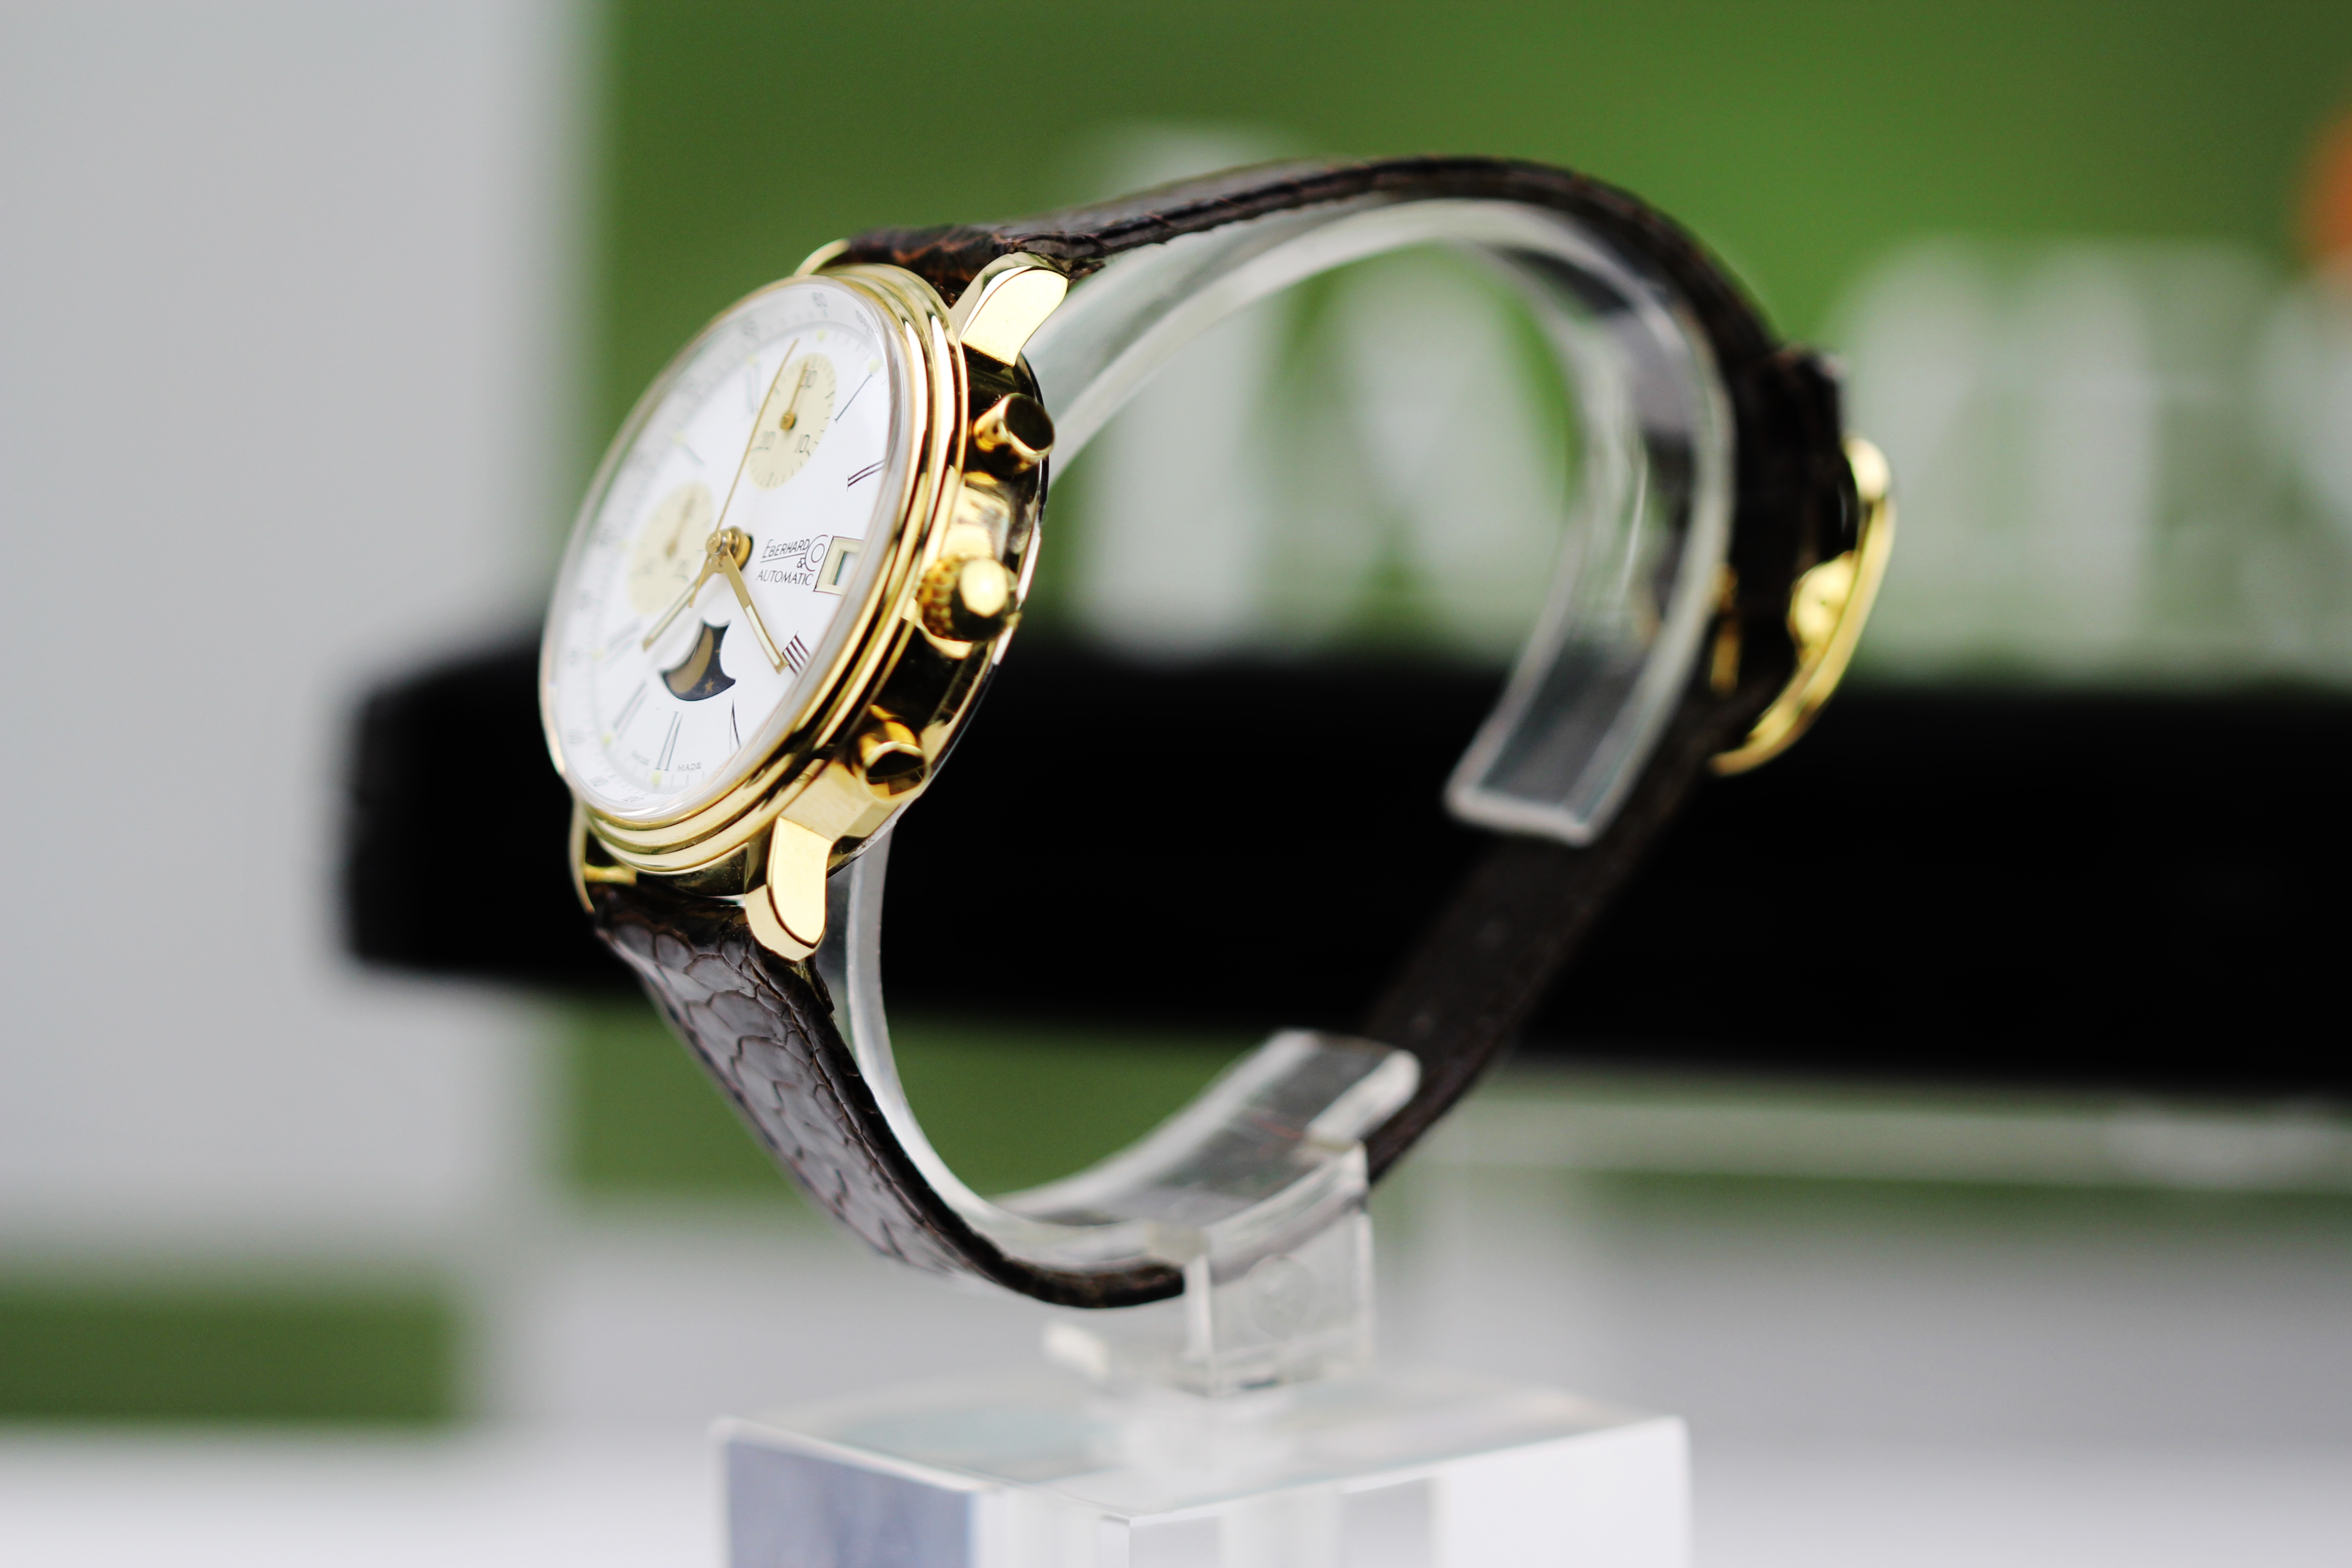 Eberhard & Co 18kt Gold Automatic Ltd Edition of 999 - Image 6 of 6